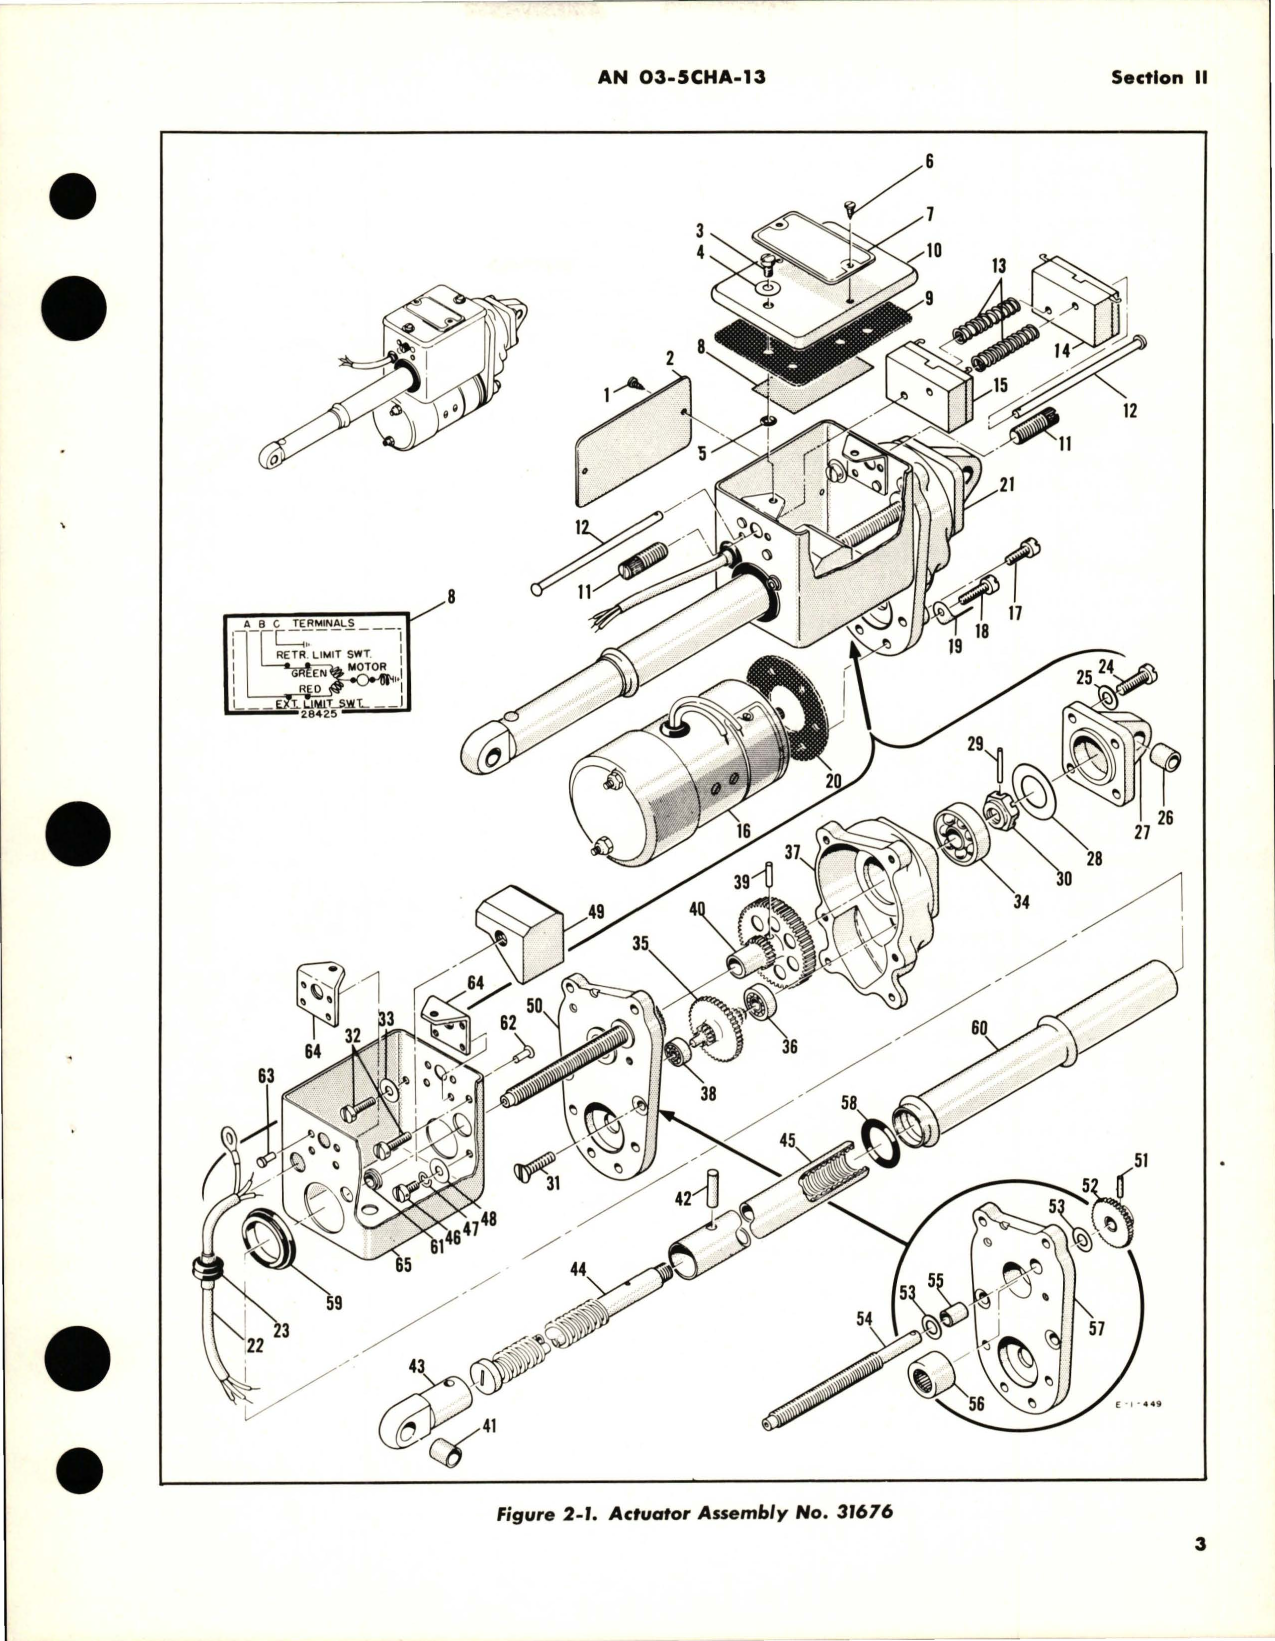 Sample page 7 from AirCorps Library document: Overhaul Instructions for Electro-Mechanical Linear Actuators 